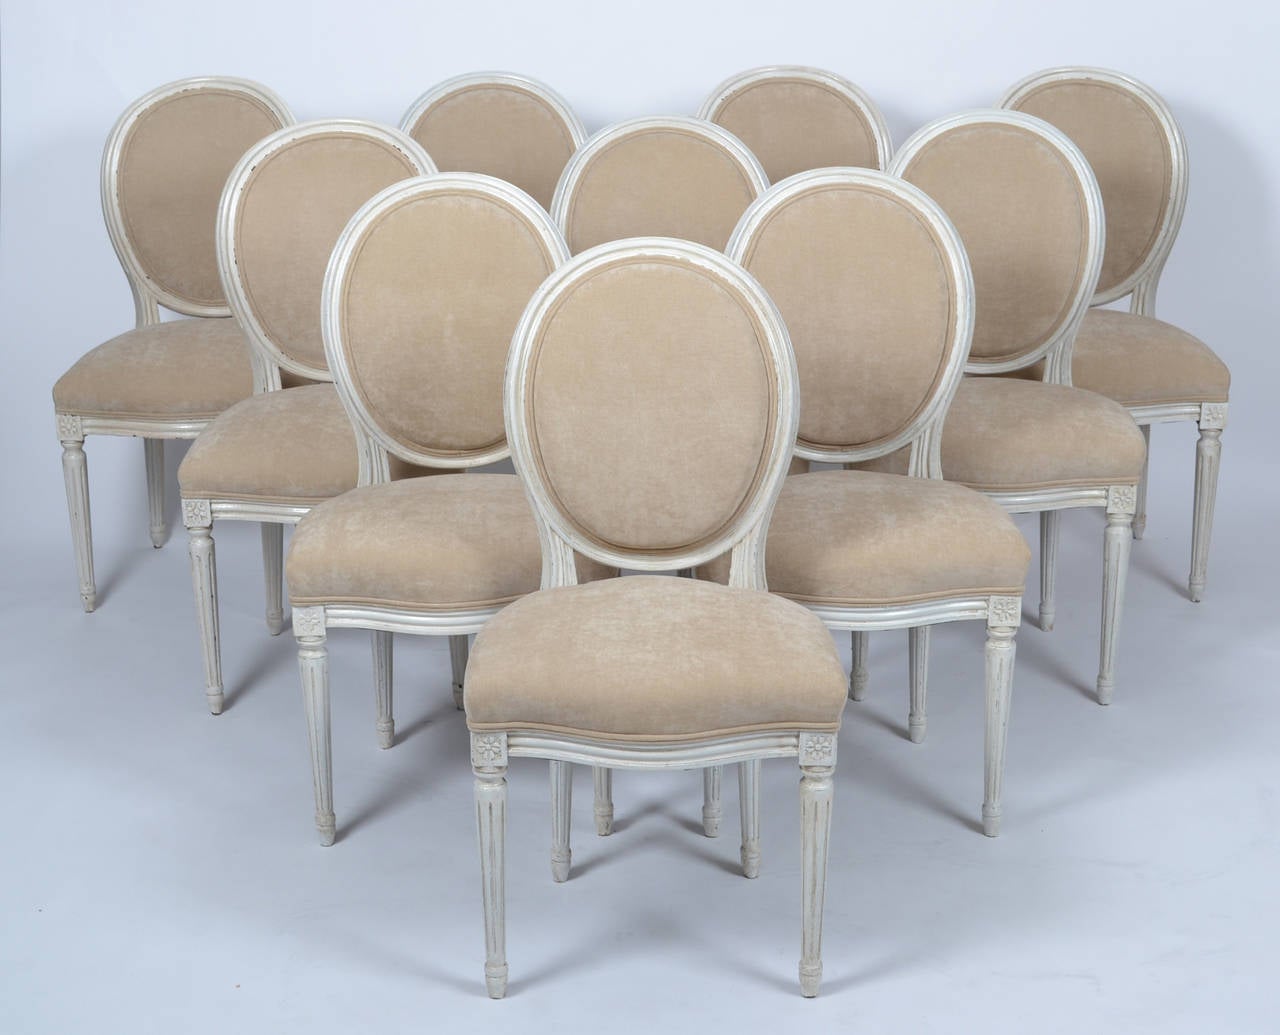 Antique French Louis XVI style set of ten, medallion back, dining room chairs. Hand-carved and patinated beechwood frames, professionally reupholstered in a beige chenille velvet. Four of the chairs have an extra vertical support on the back of the